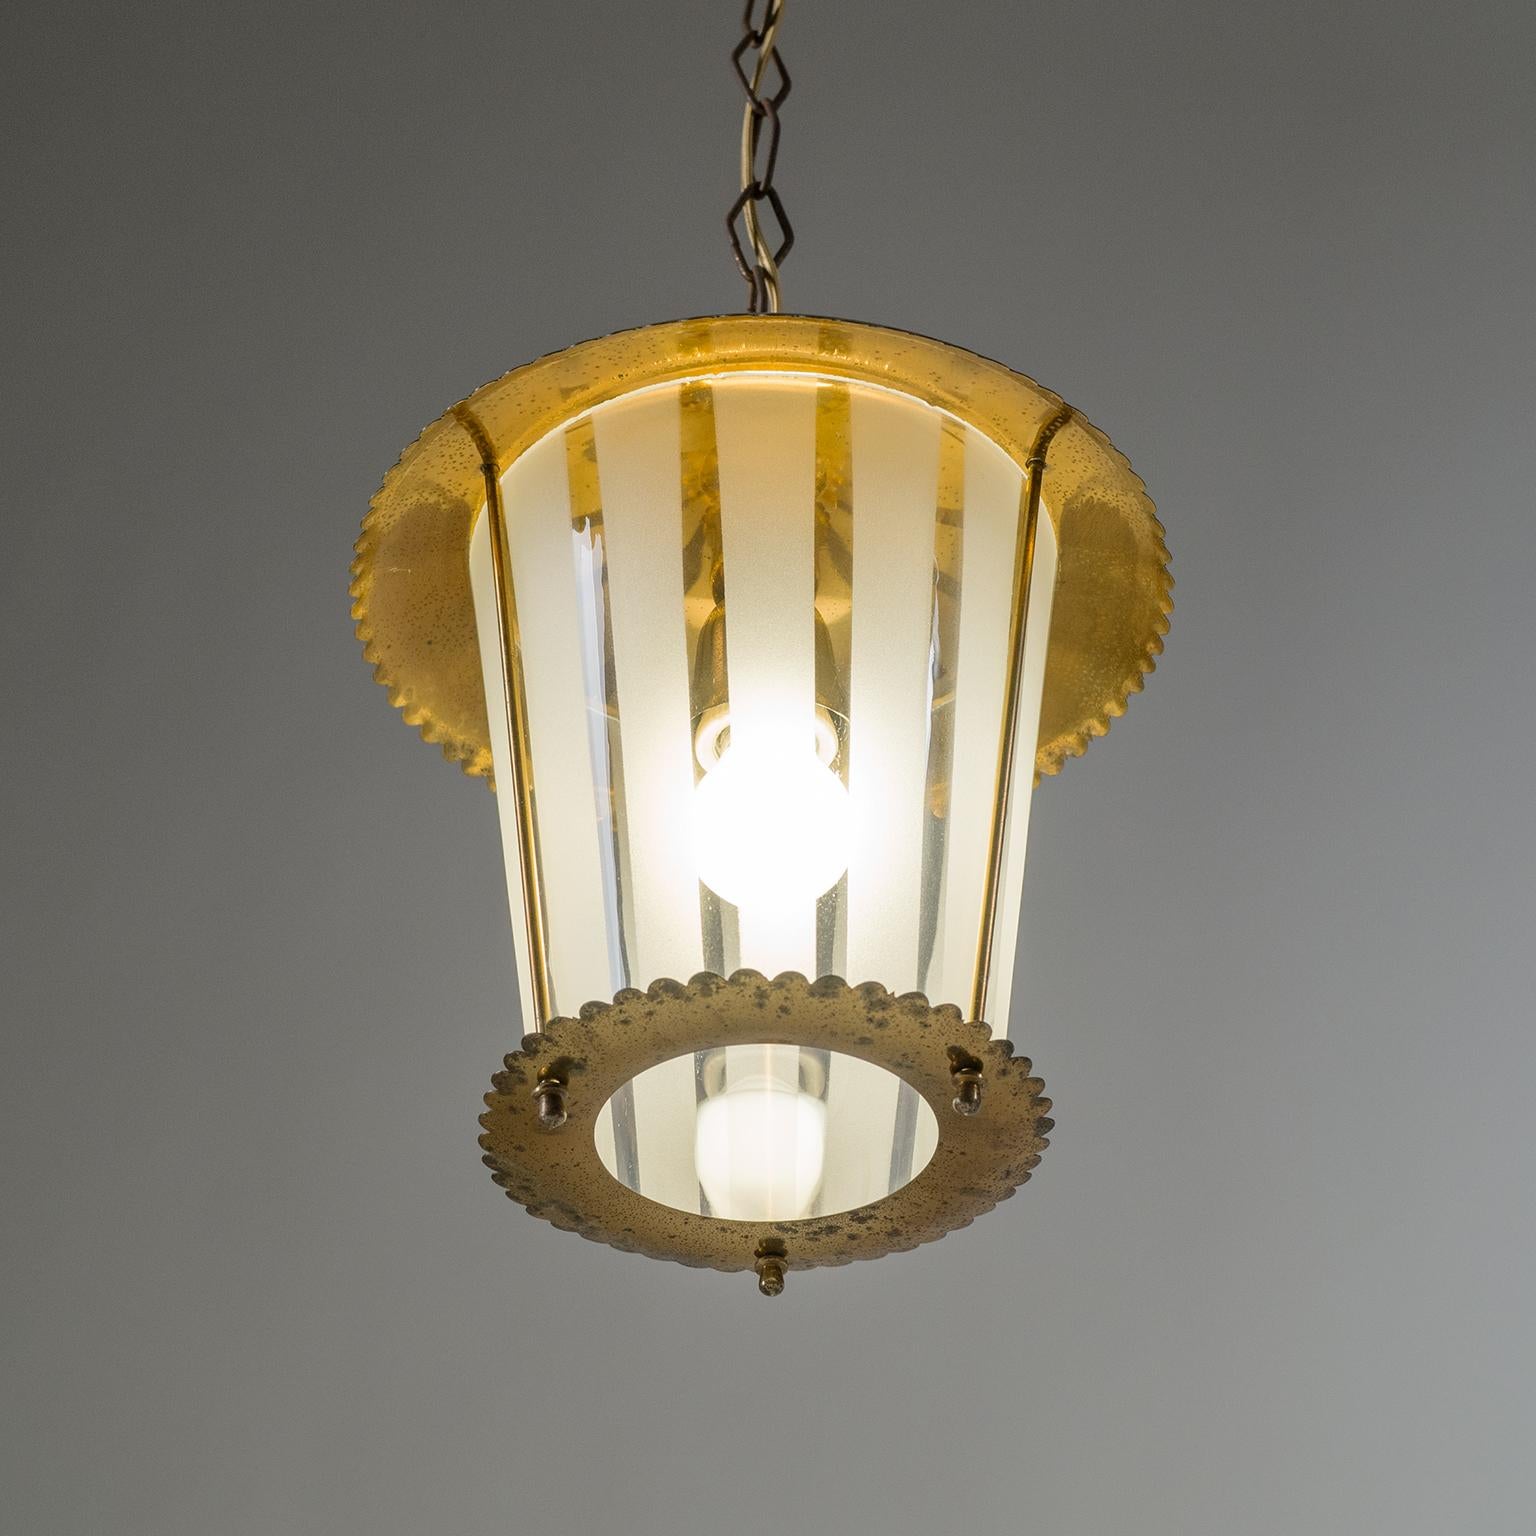 Frosted Italian Lantern, 1940s, Striped Glass and Brass